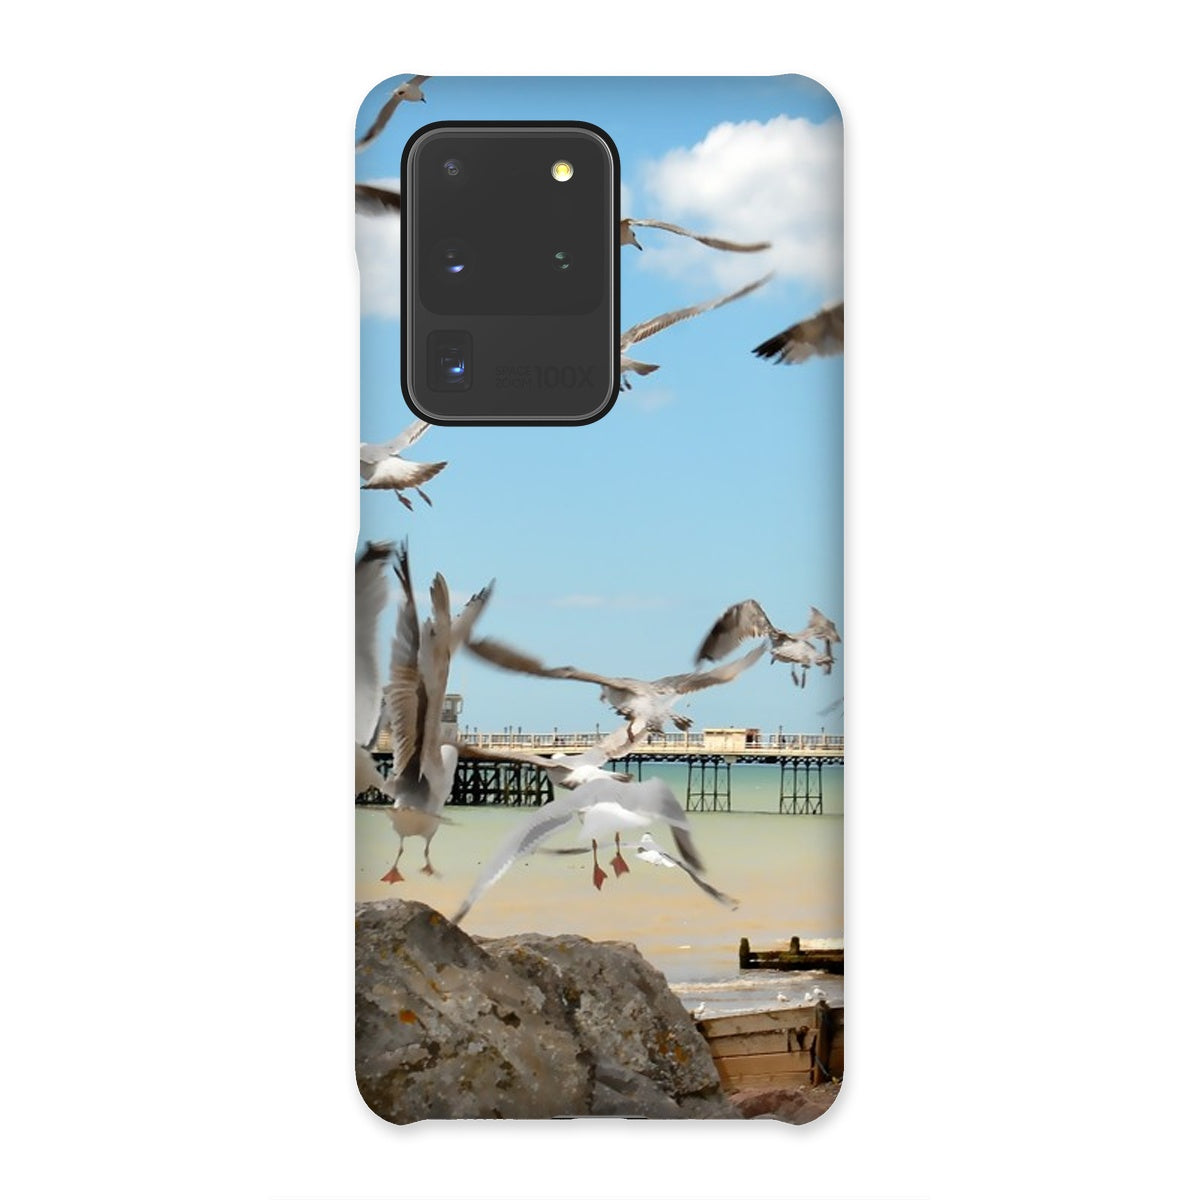 Seagulls At Feeding Time By David Sawyer Snap Phone Case